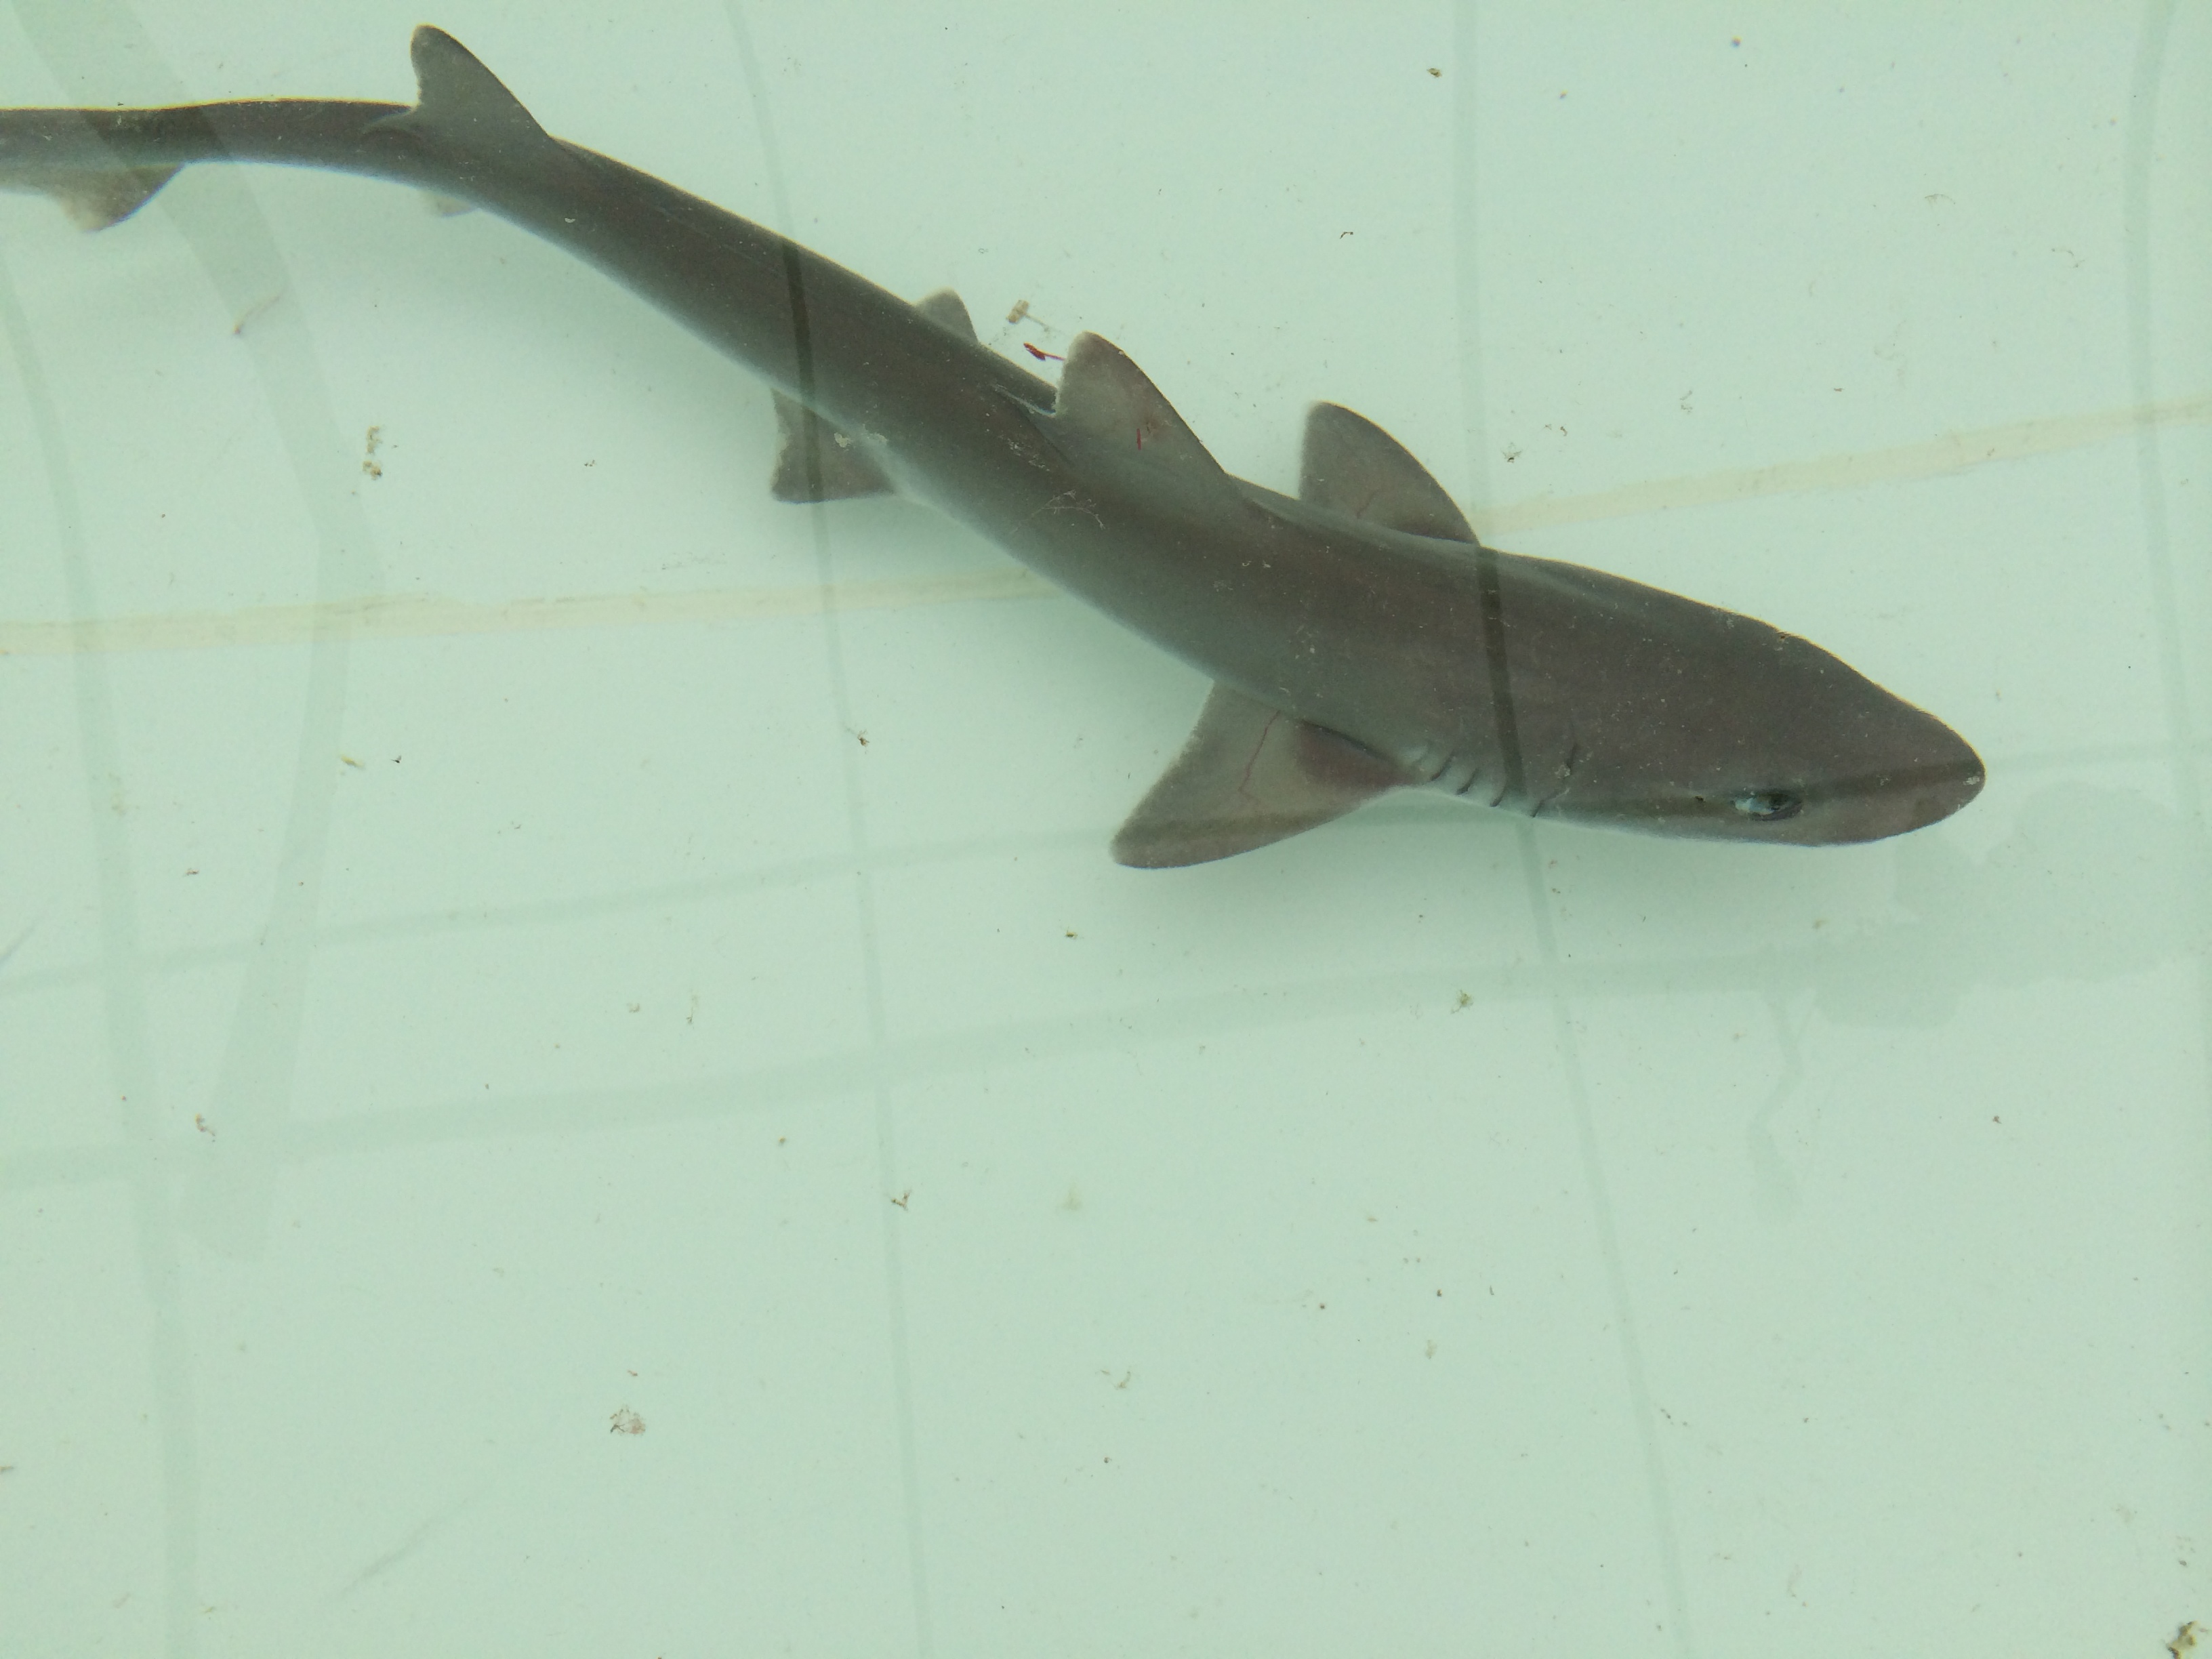 The smooth dogfish, a shark whose range includes the Atlantic Ocean off the eastern United States, could lose their ability to sense the smell of food if climate change if ocean acidification continues its current pace. Credit: Danielle Dixson